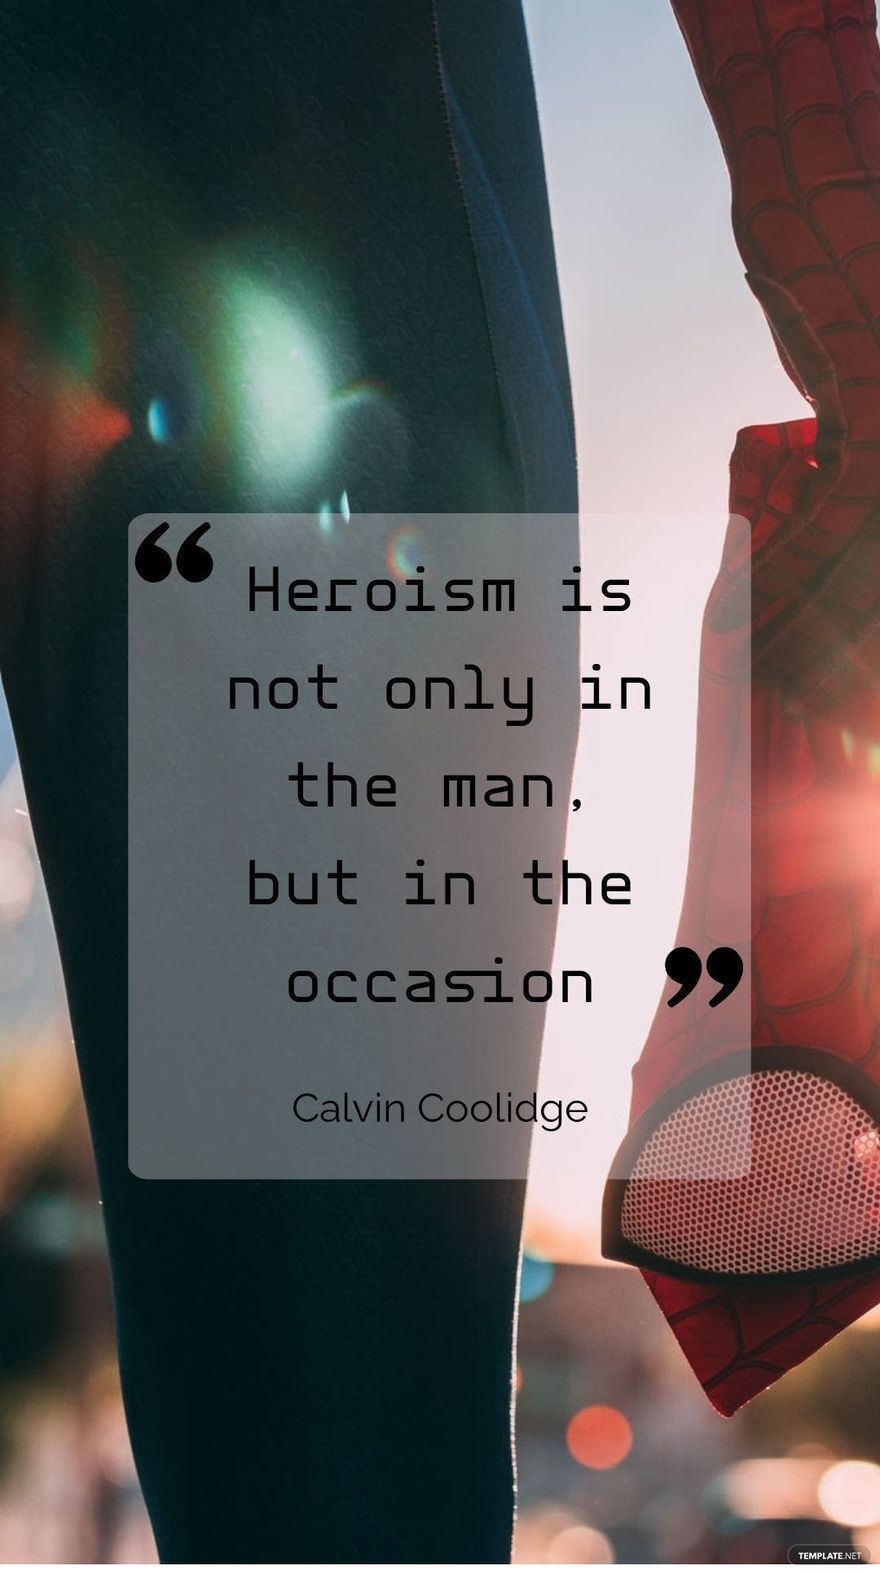 Free Calvin Coolidge - Heroism is not only in the man, but in the occasion in JPG